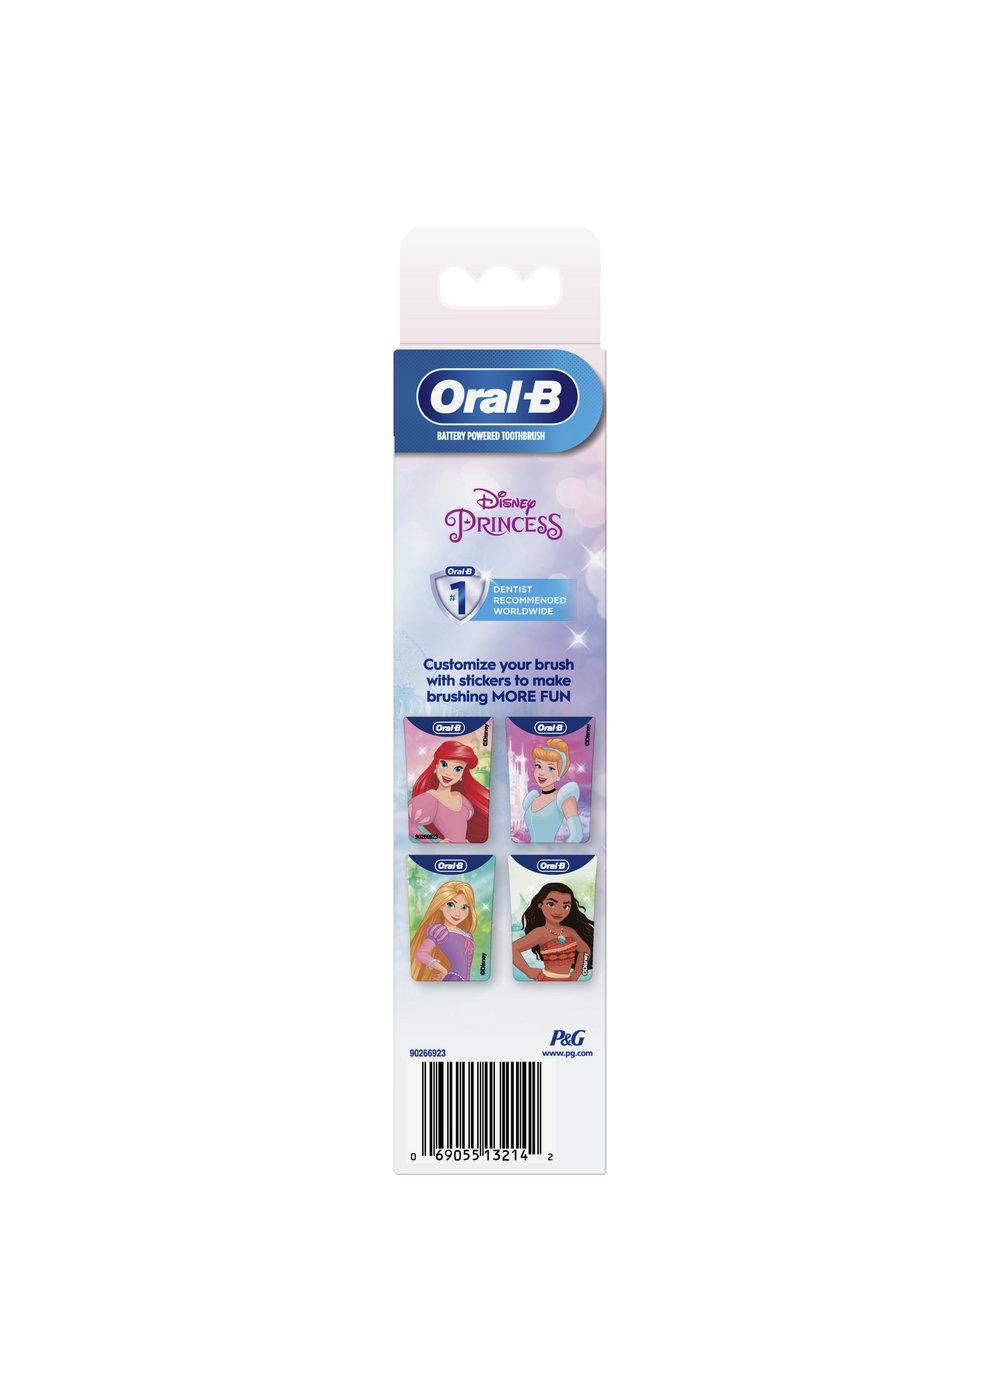 Oral-B Kid's Battery Toothbrush featuring Disney's Princesses - Soft Bristles; image 6 of 10